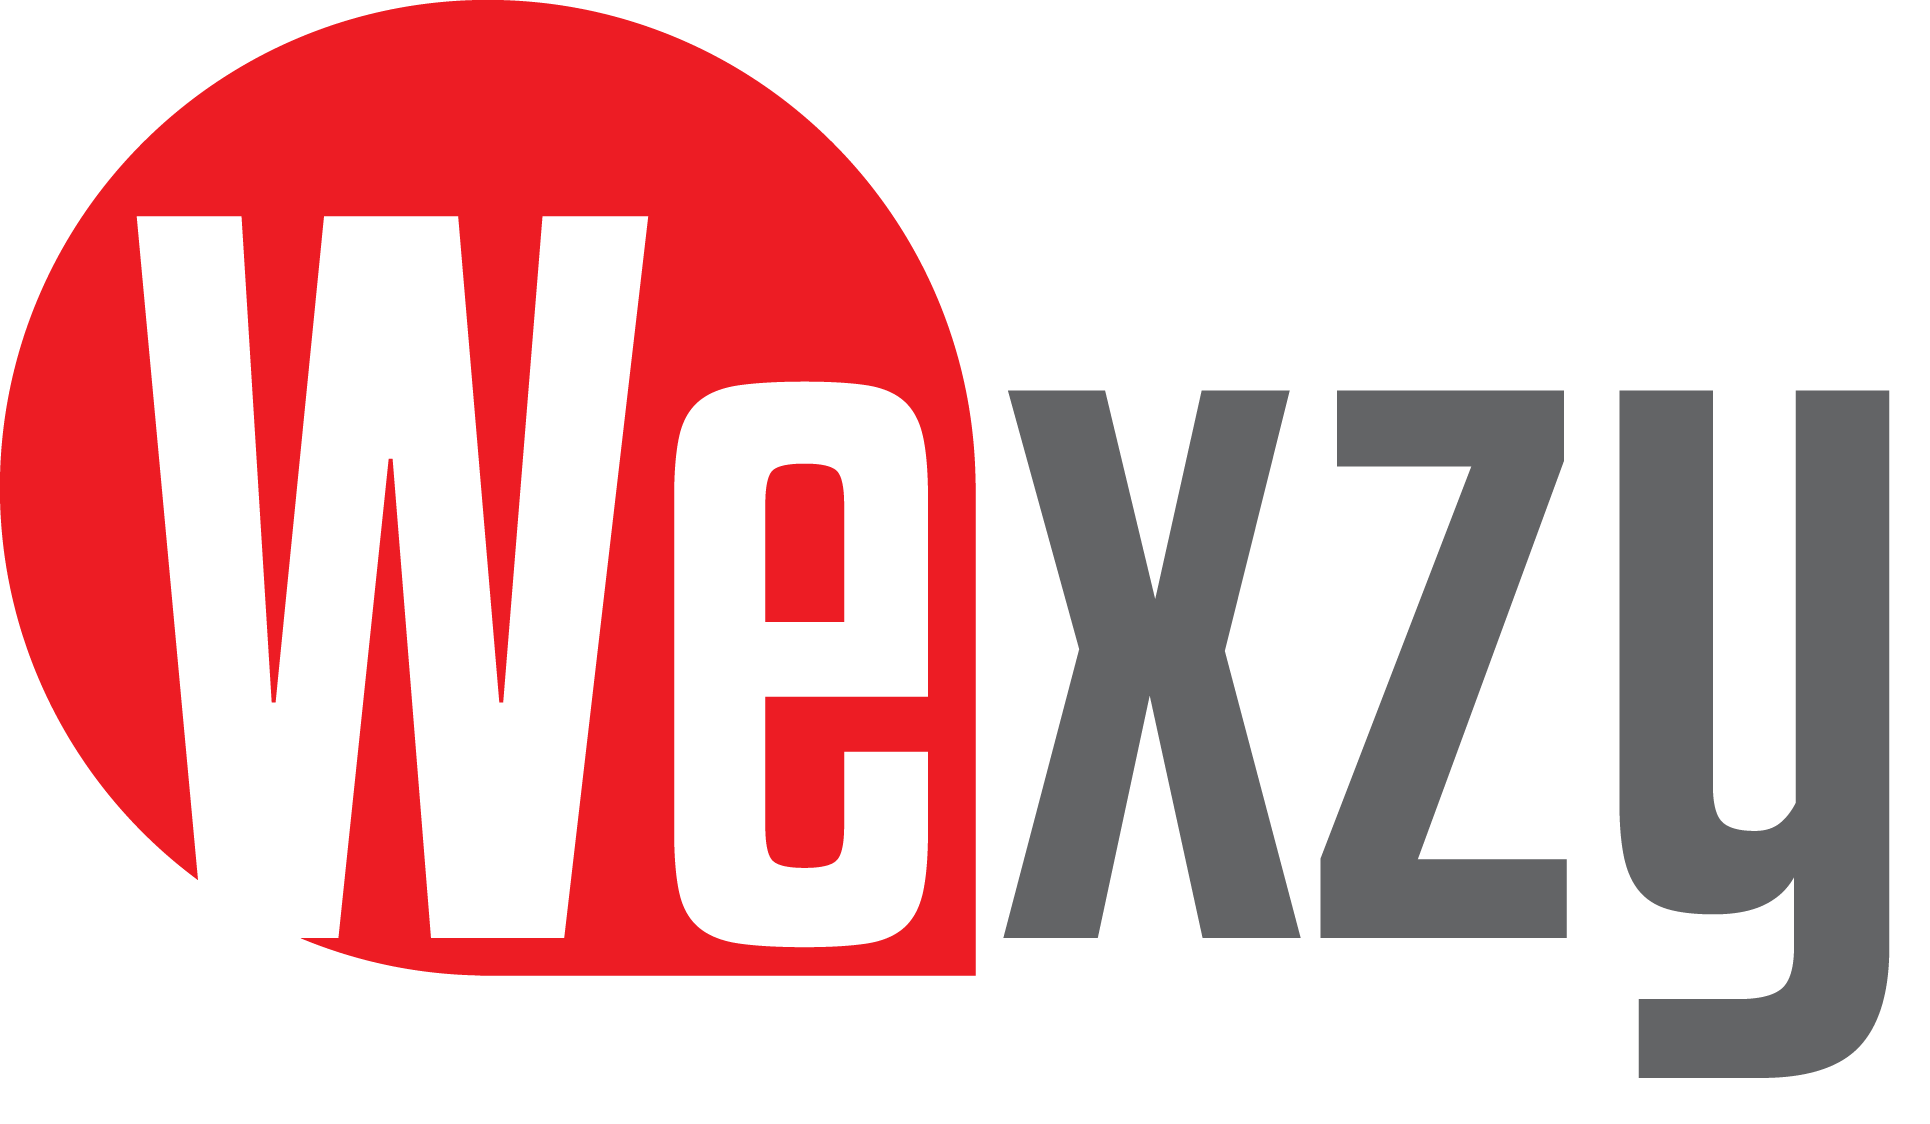 wexzy.com is for sale